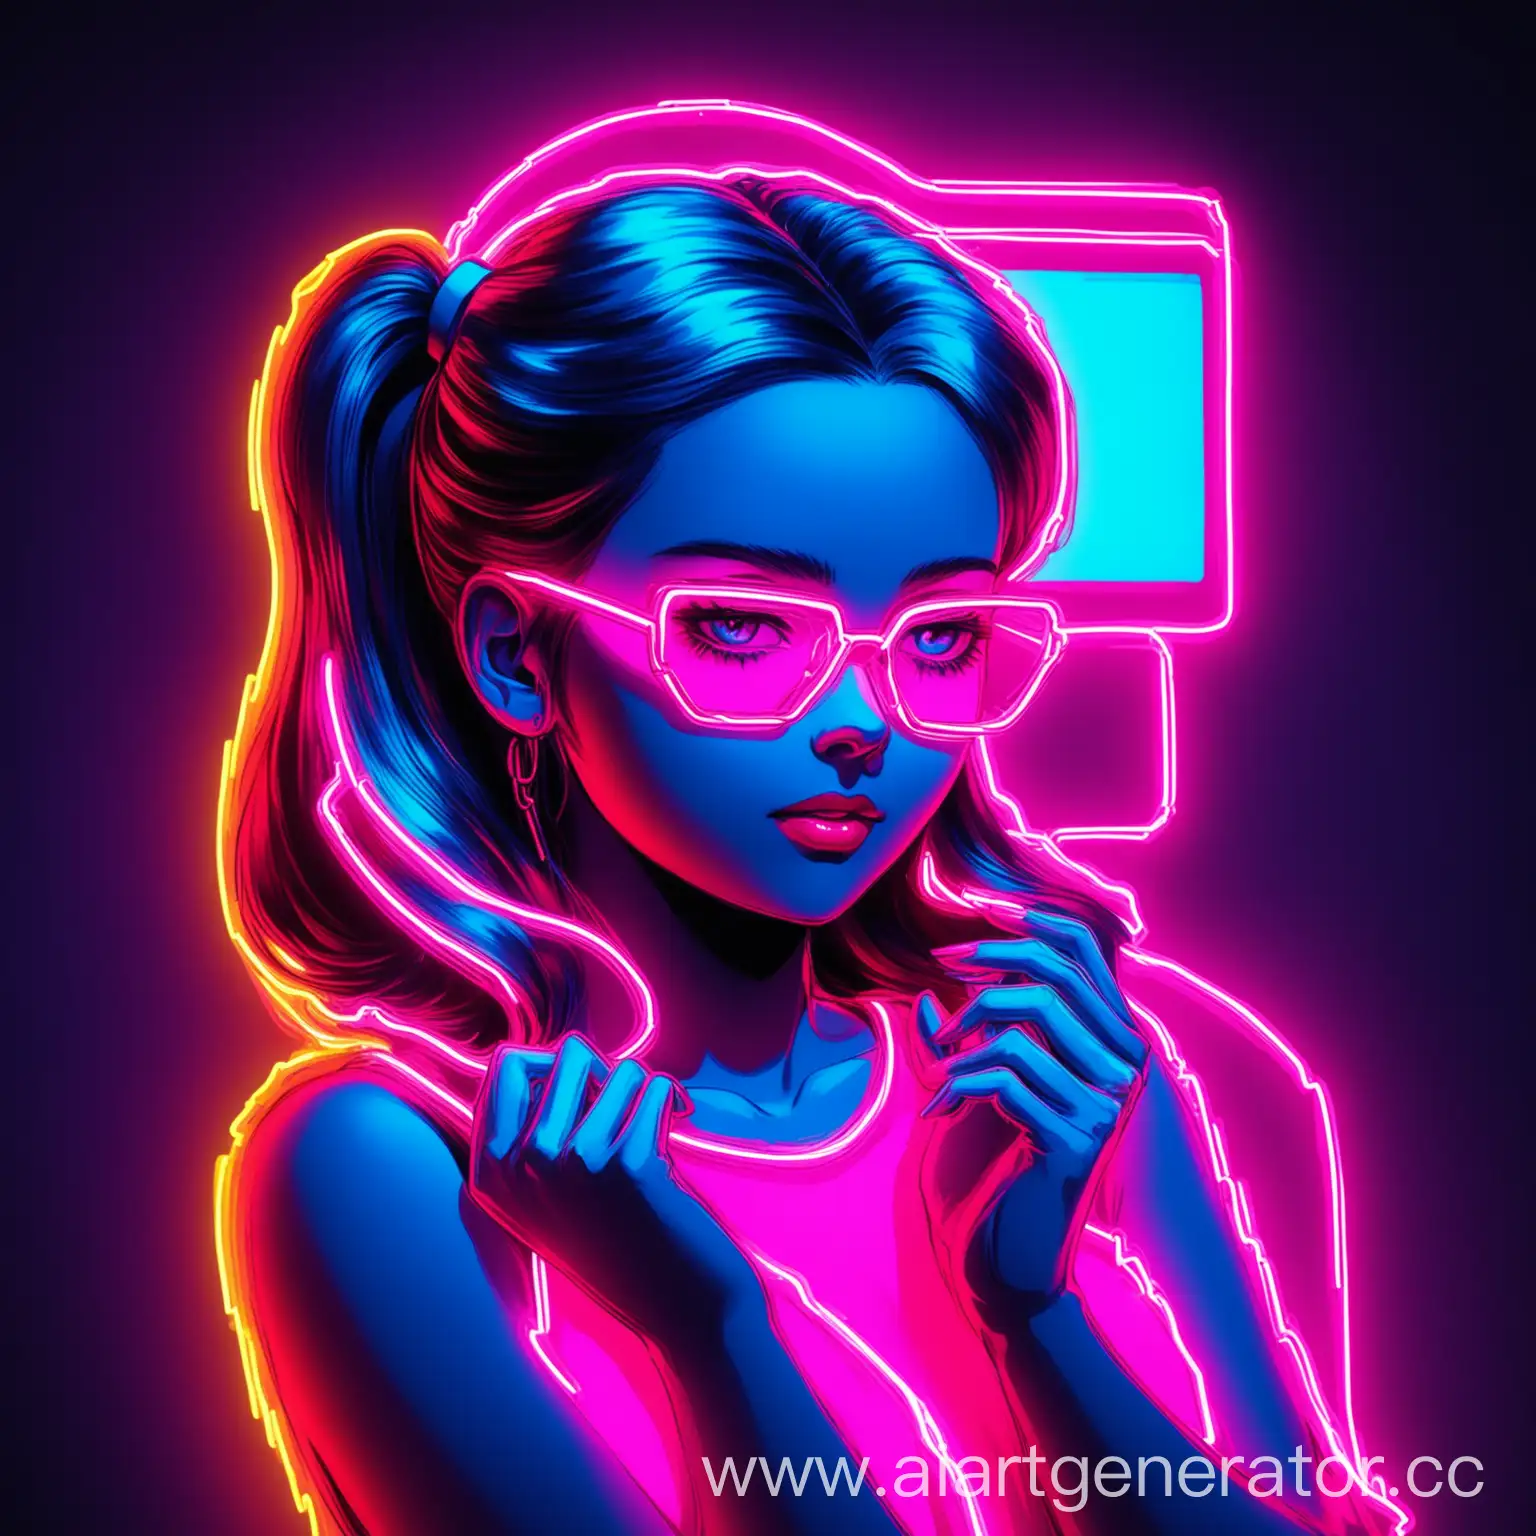 Neon-Style-Girl-Poses-in-Urban-Night-Landscape